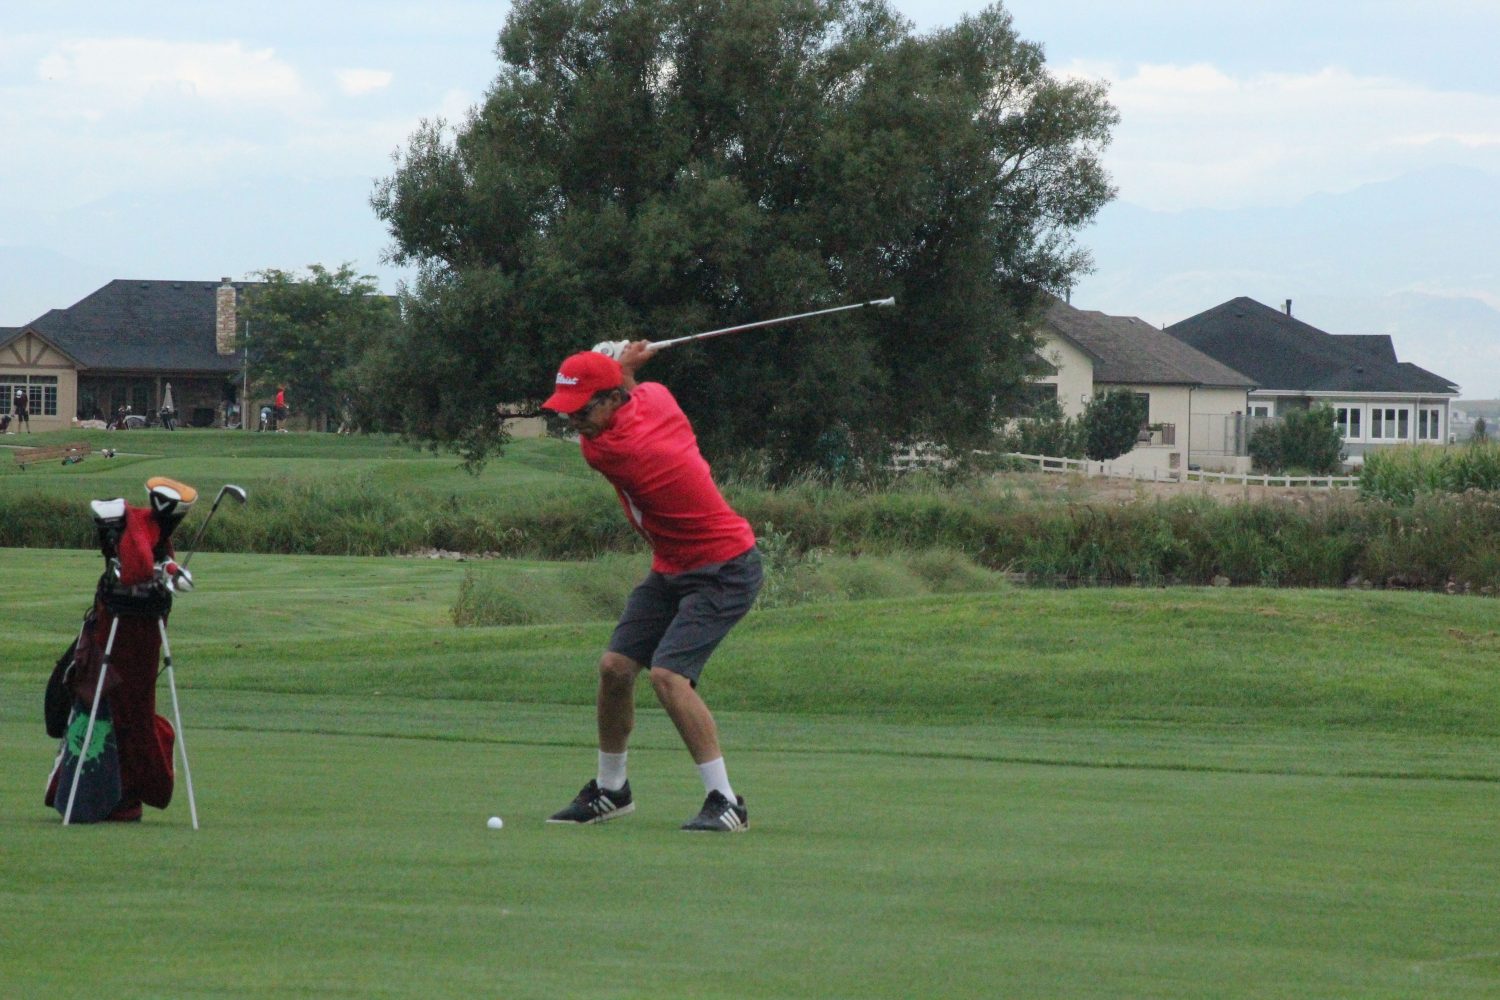 J.D. Truax (14) practices his swing before the competition.